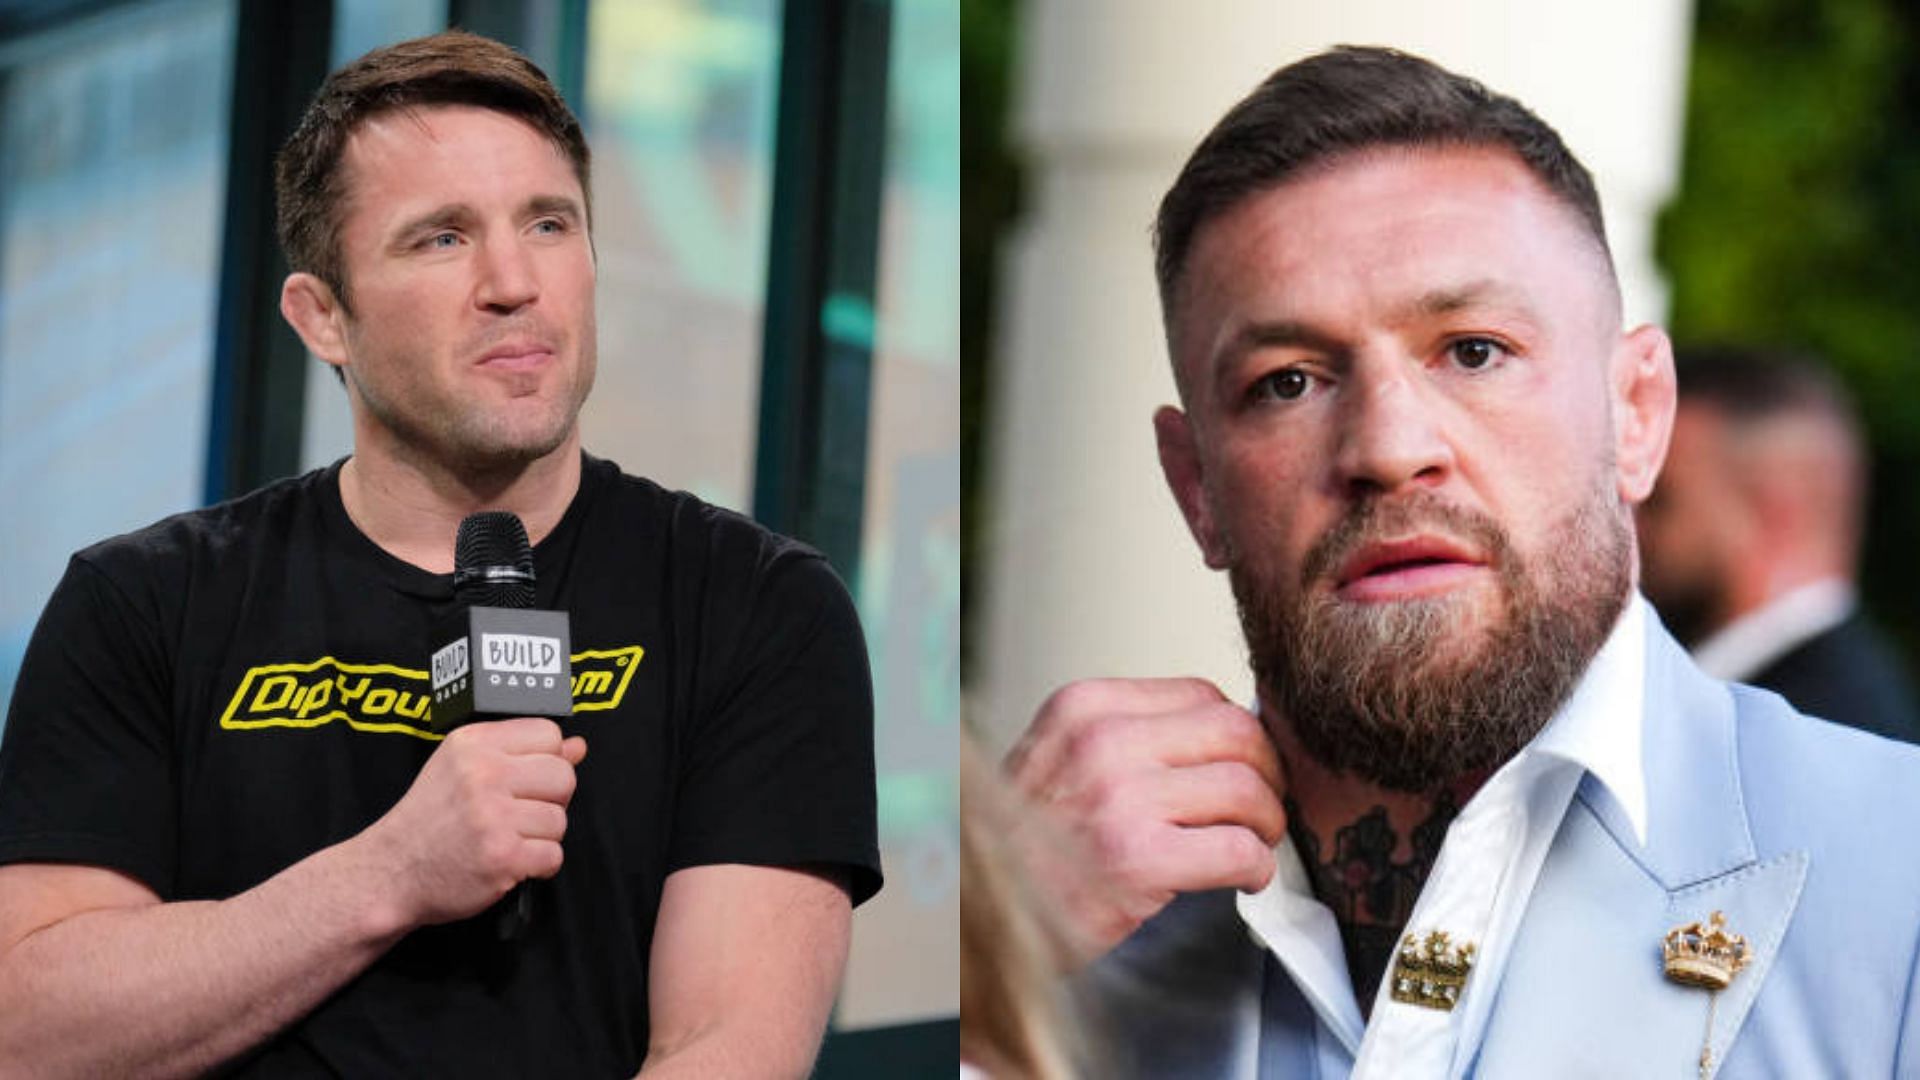 Chael Sonnen (L) claims Conor McGregor (R) will return stronger to the octagon